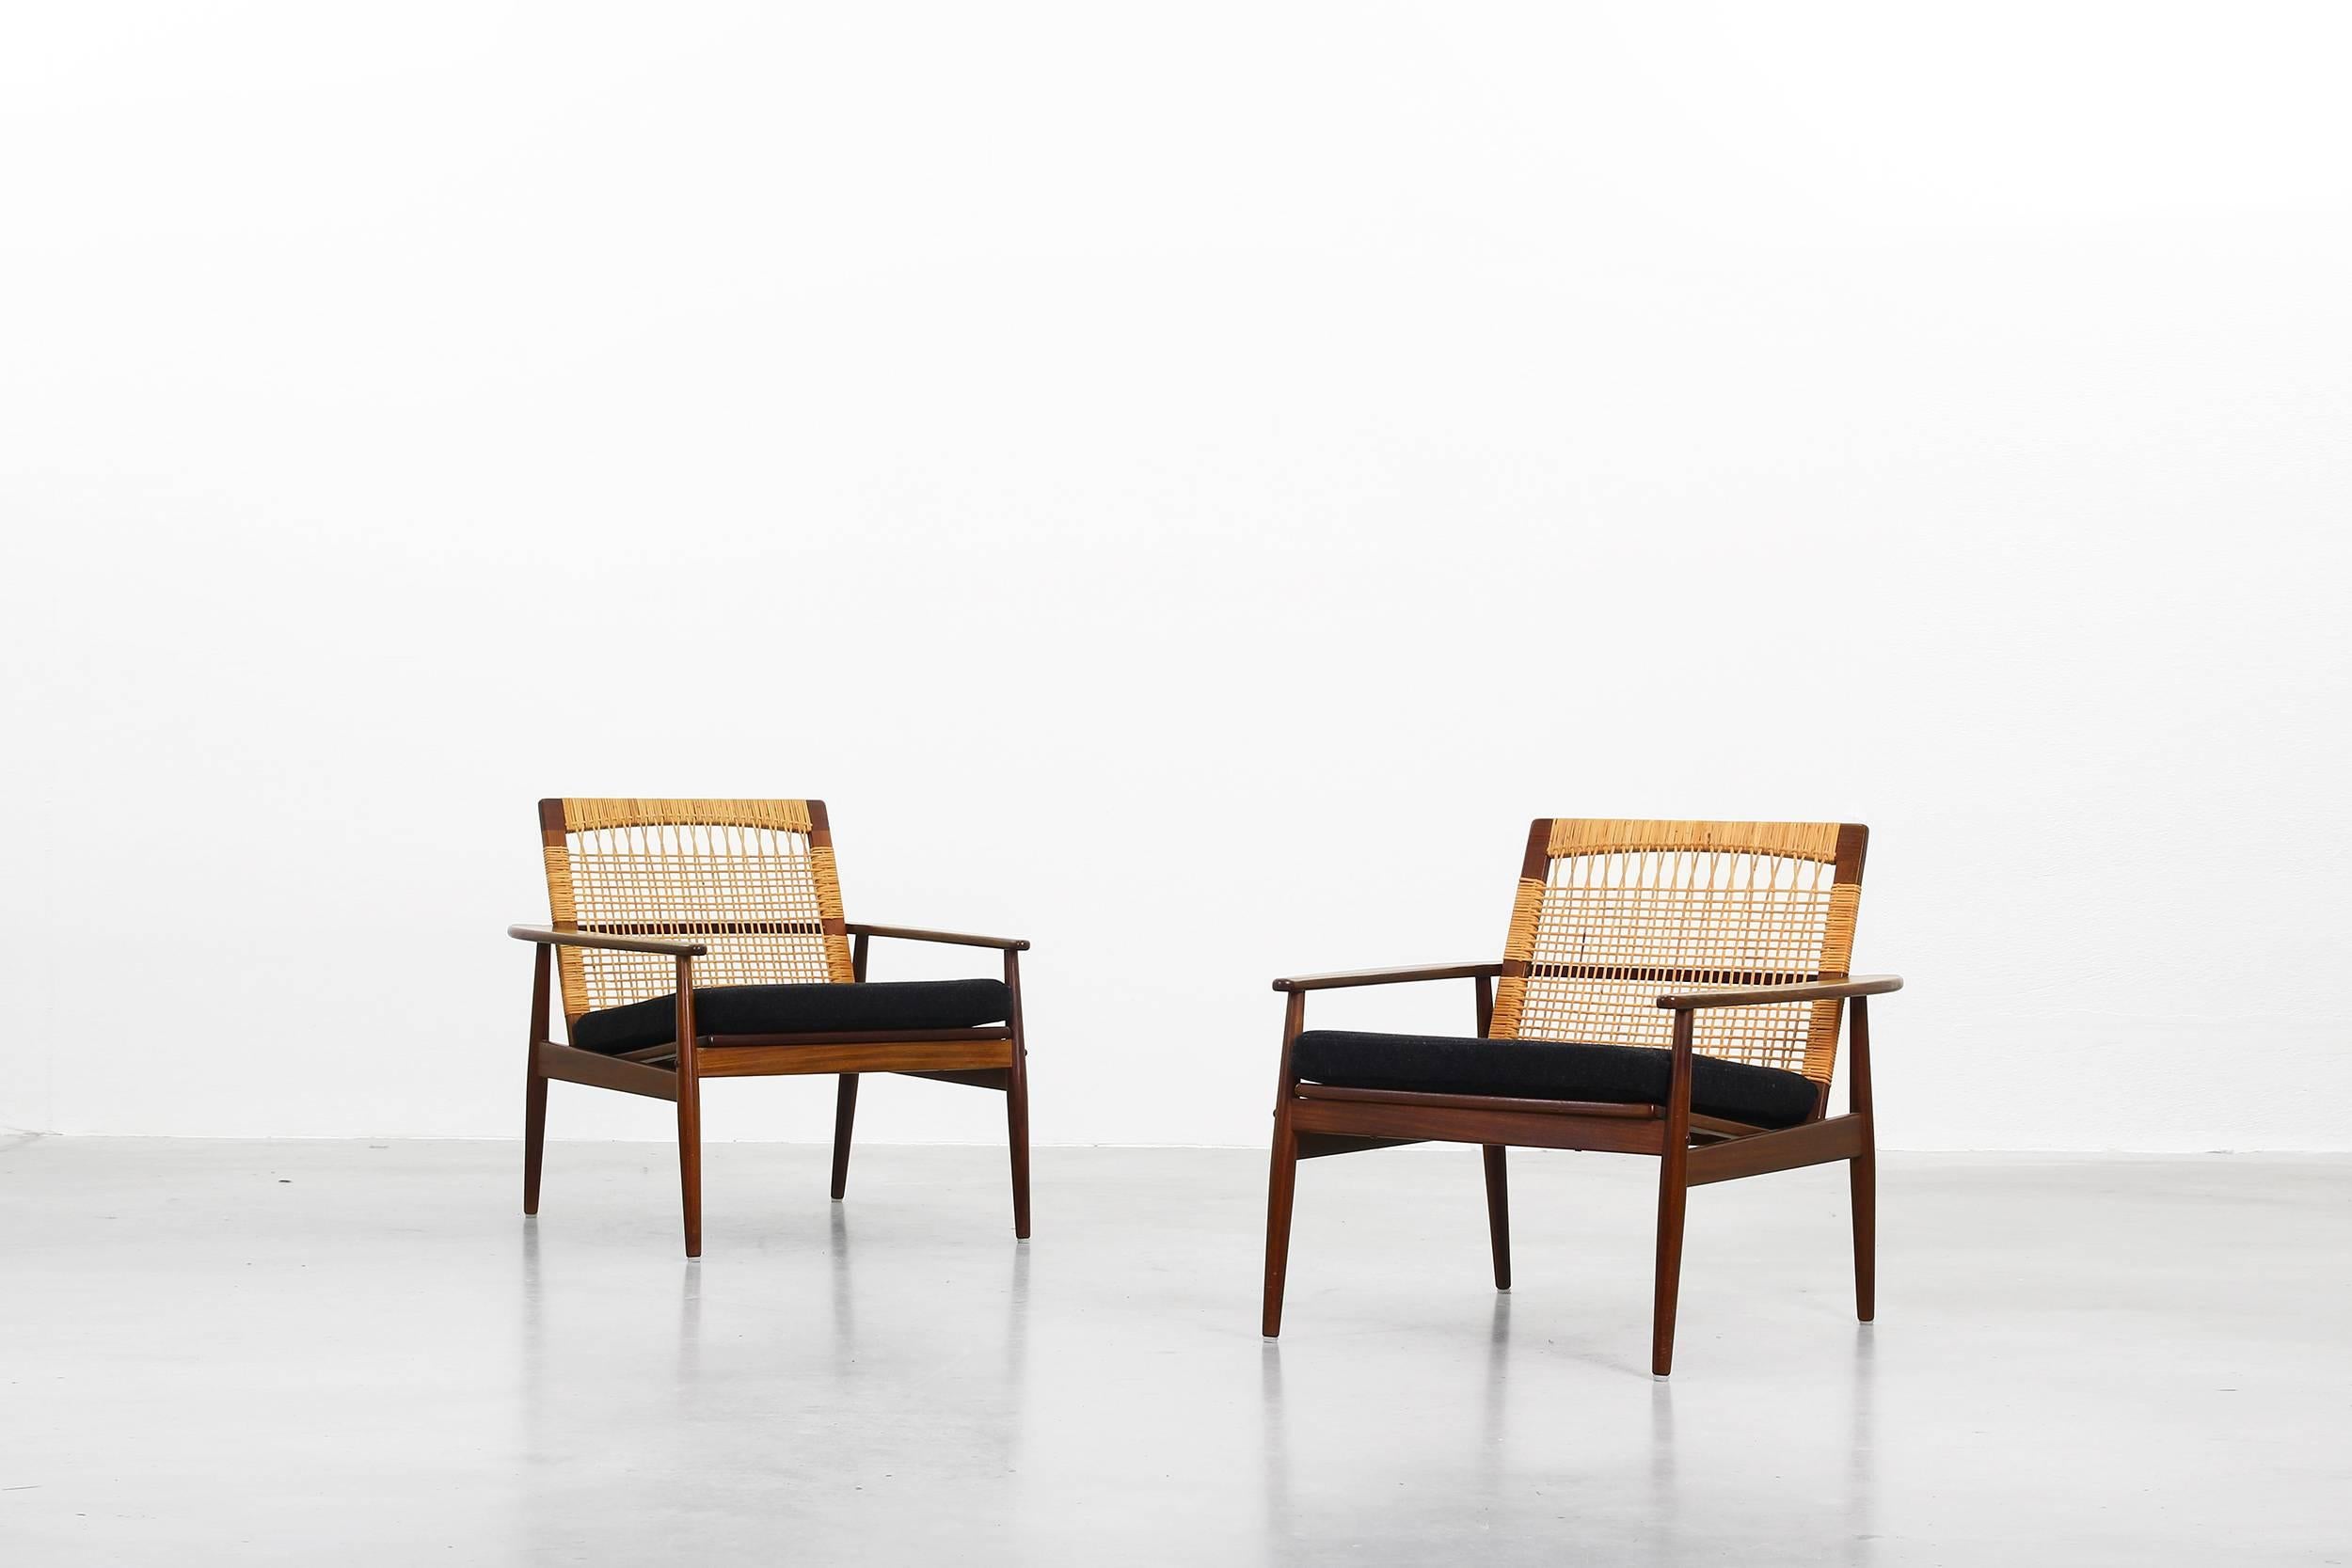 Very rare pair of lounge chairs designed by Hans Olsen for Juul Kristiansen in 1959. Both chairs are in a very good condition with just little signs of use. The frame is made of teakwood and the back comes with a mesh of cane. Further the cushions